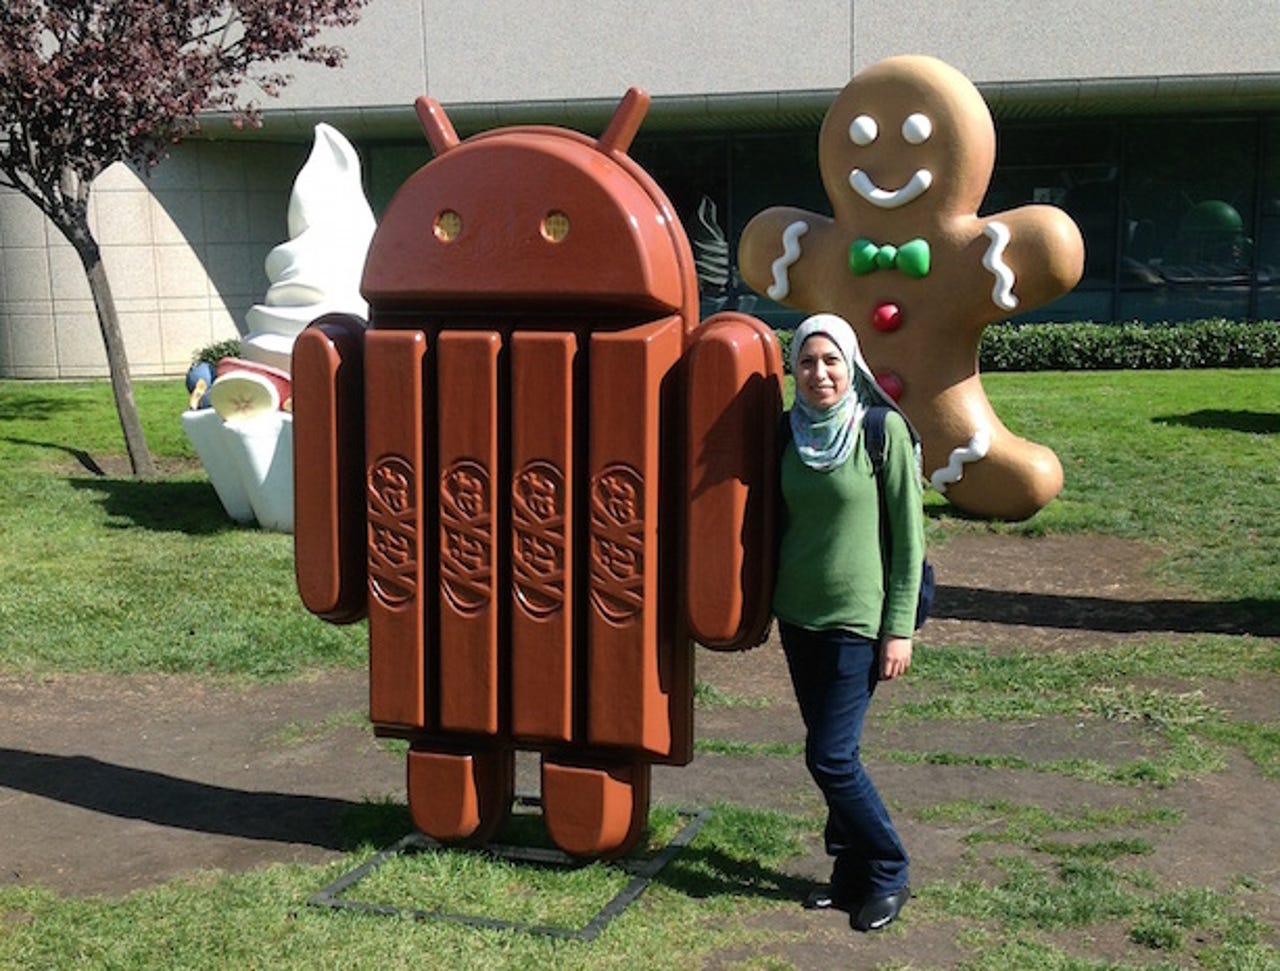 nihal-at-google-with-kitkat-android.jpg